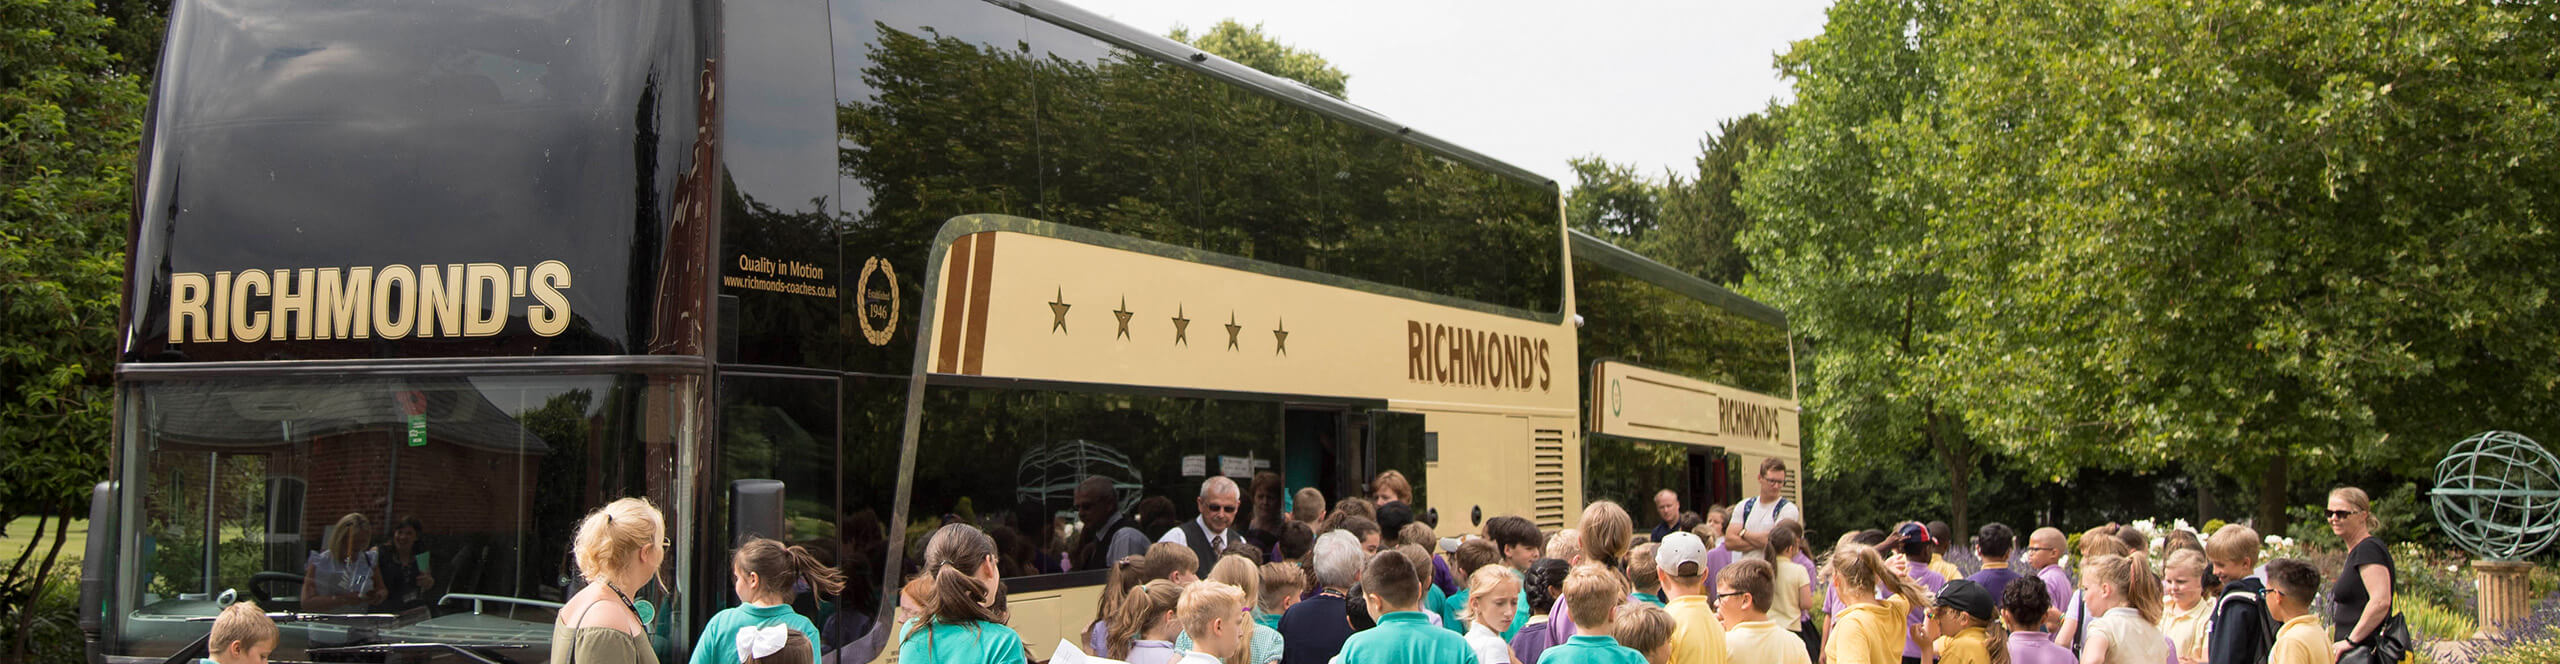 A school group using Richmonds Coaches on the Wellcome Genome Campus